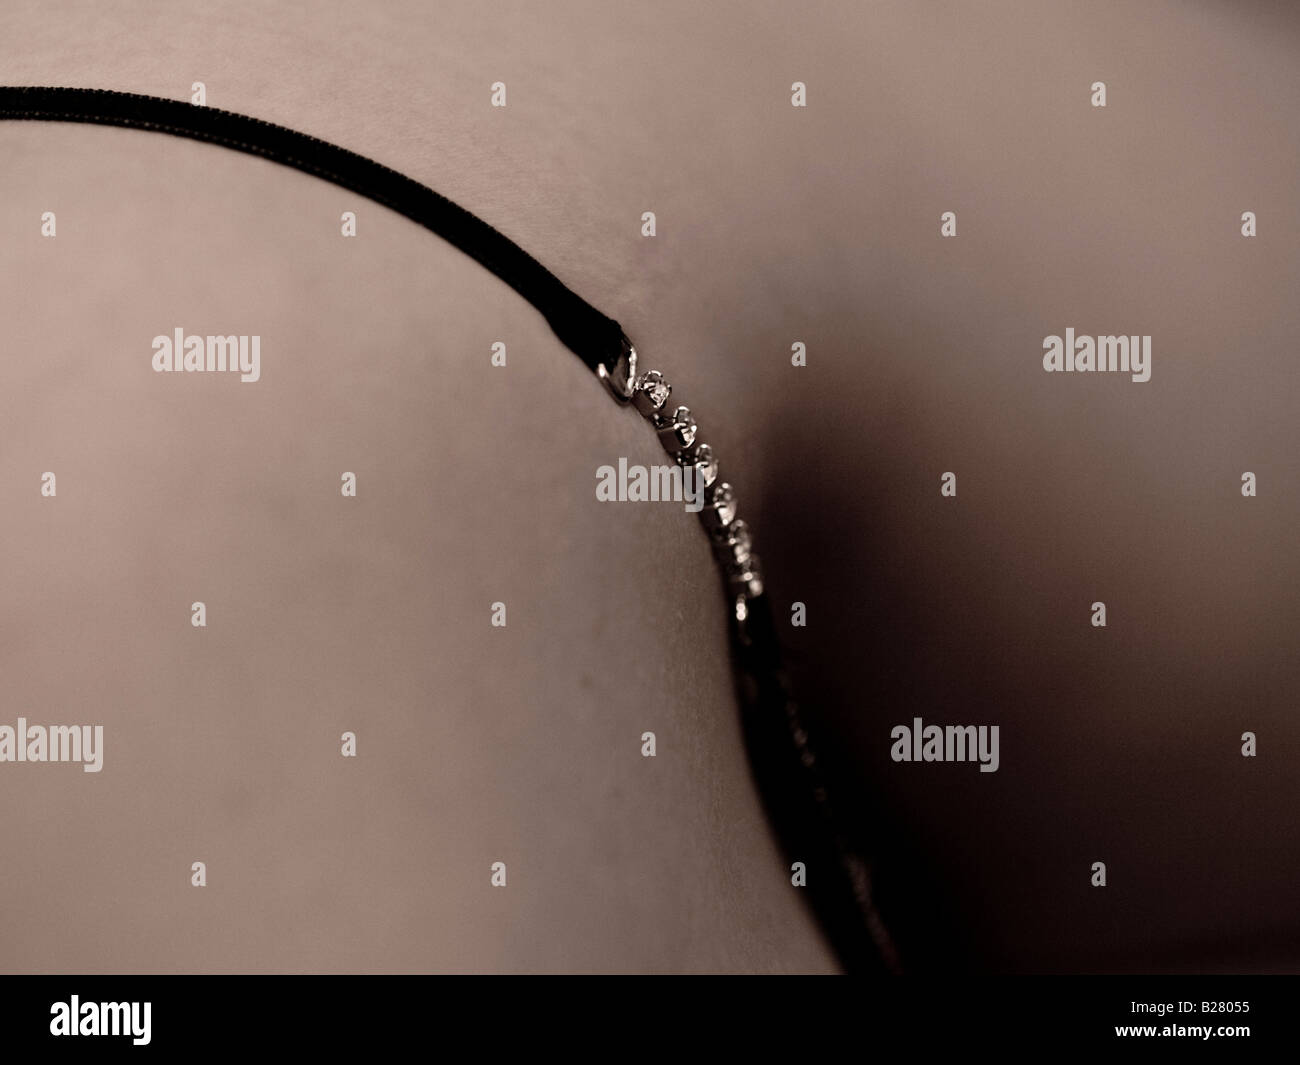 Close-up view of woman's body. Stock Photo